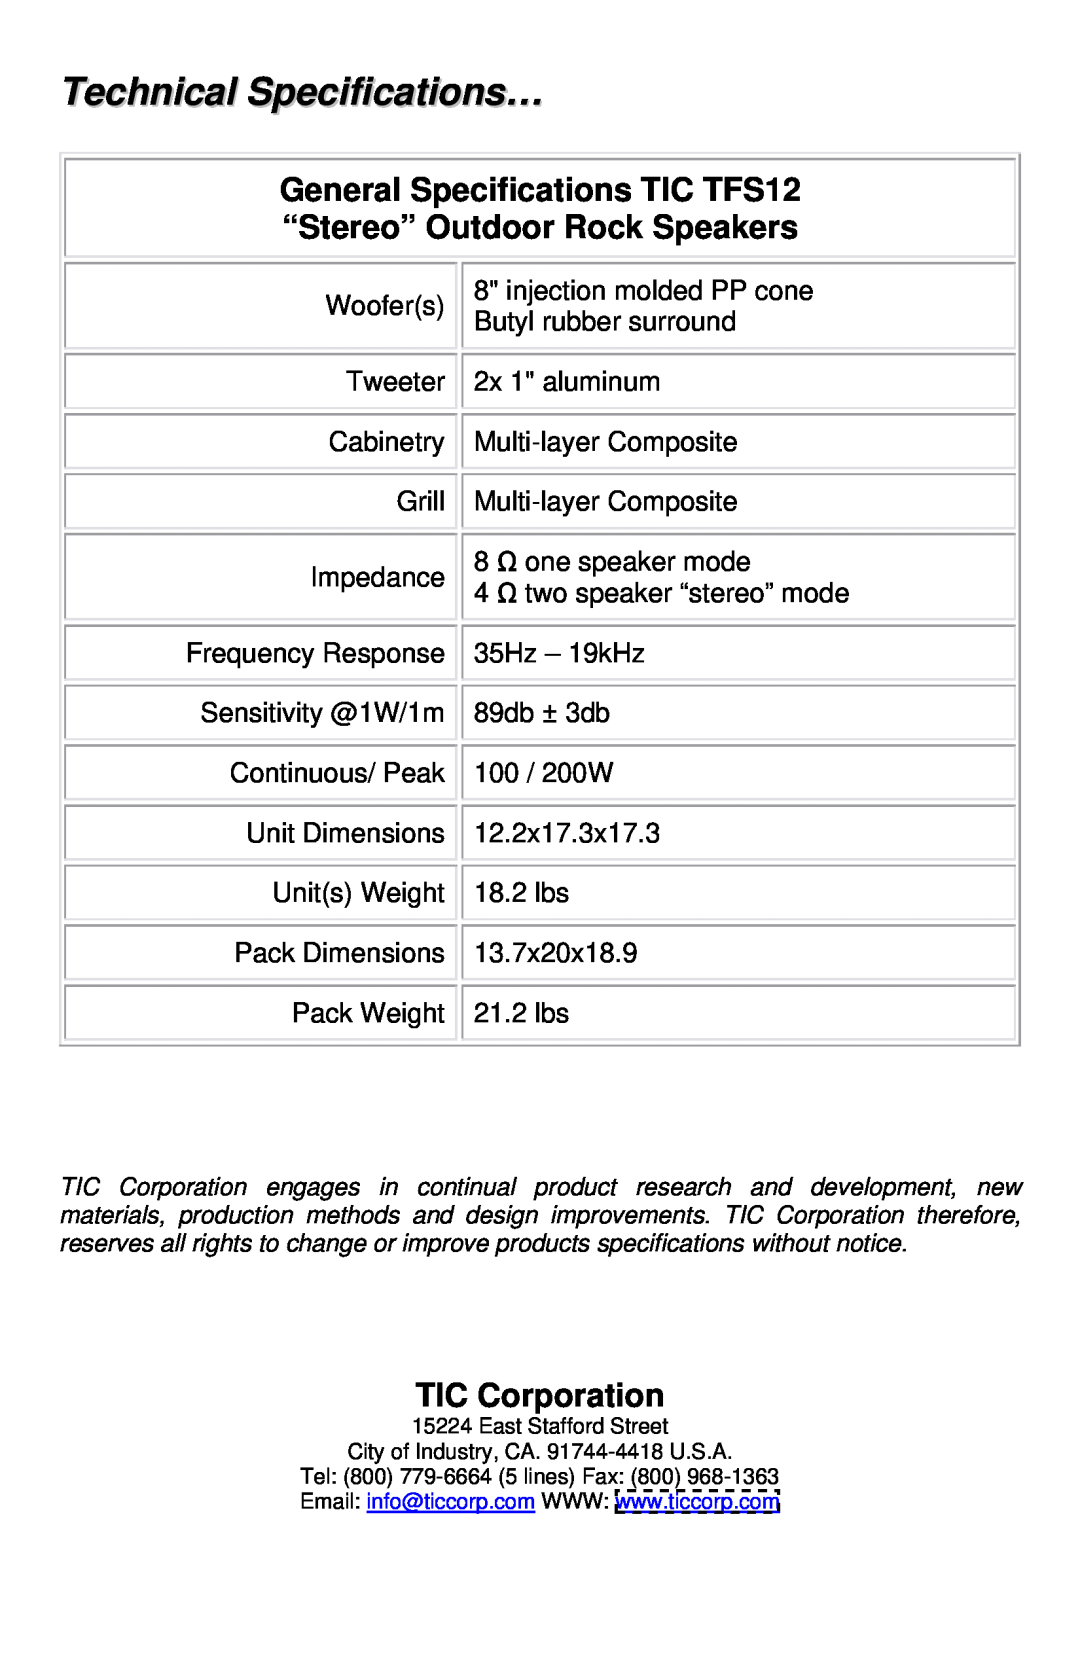 TIC manual Technical Specifications…, General Specifications TIC TFS12, “Stereo” Outdoor Rock Speakers, TIC Corporation 